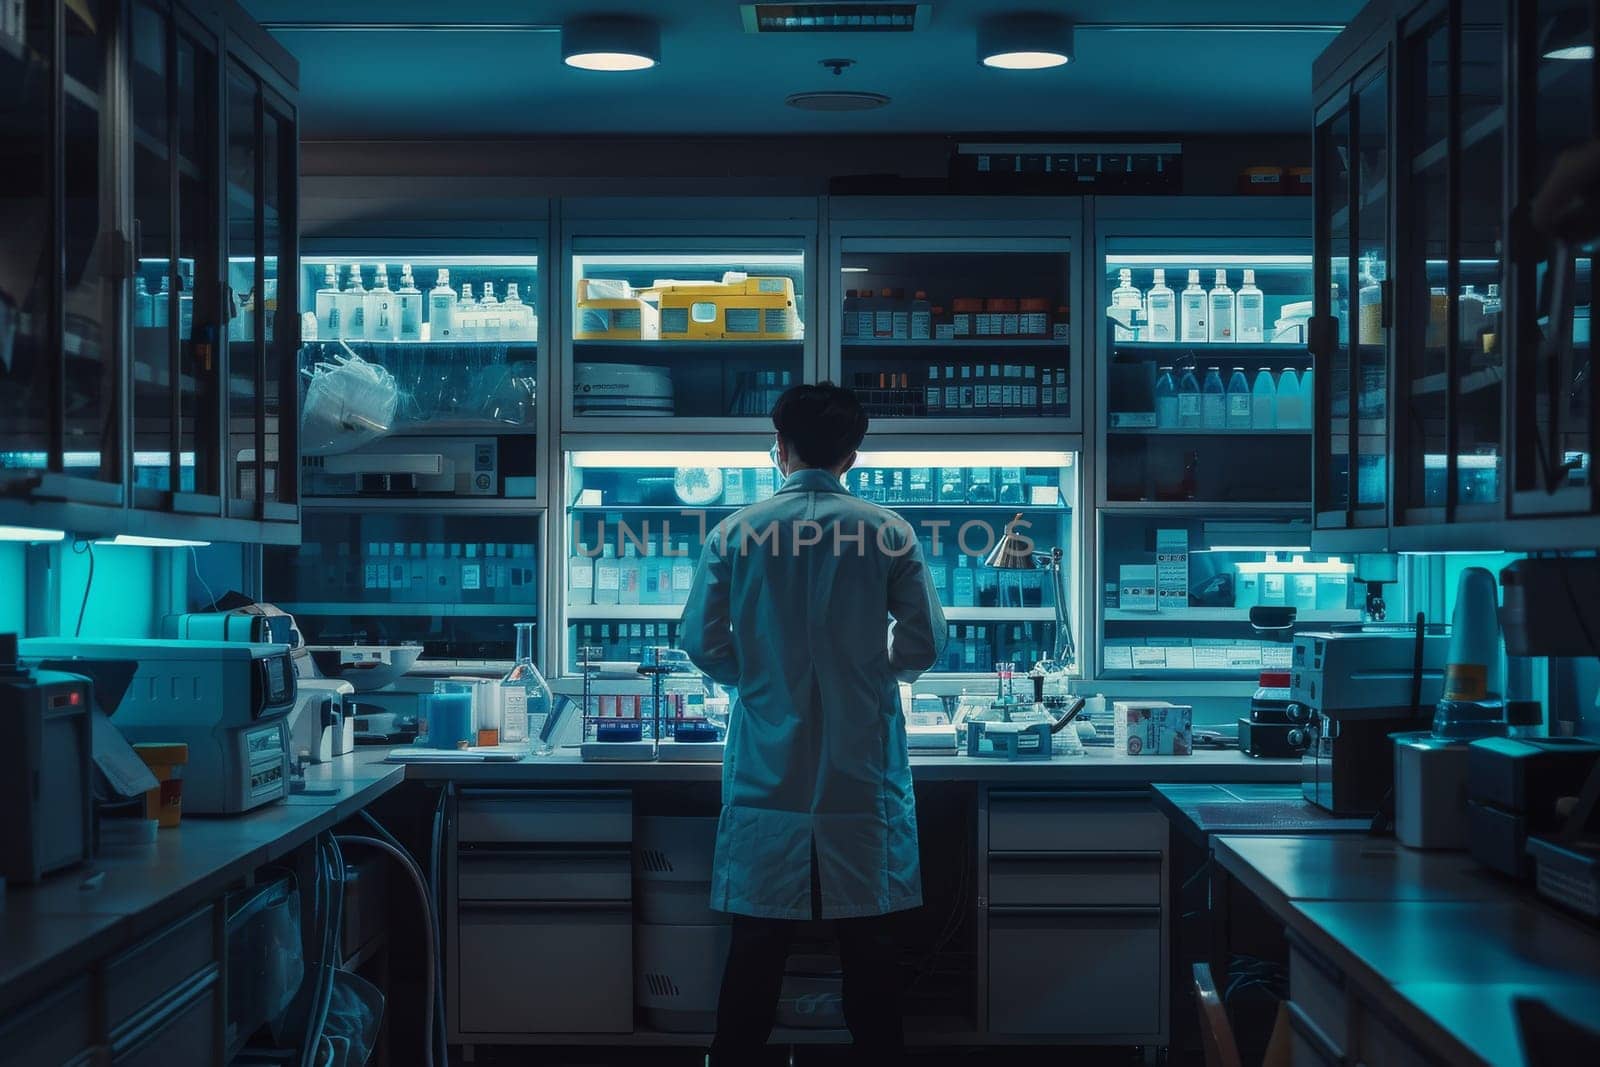 A man in a lab coat stands in front of a counter full of bottles and beakers by itchaznong